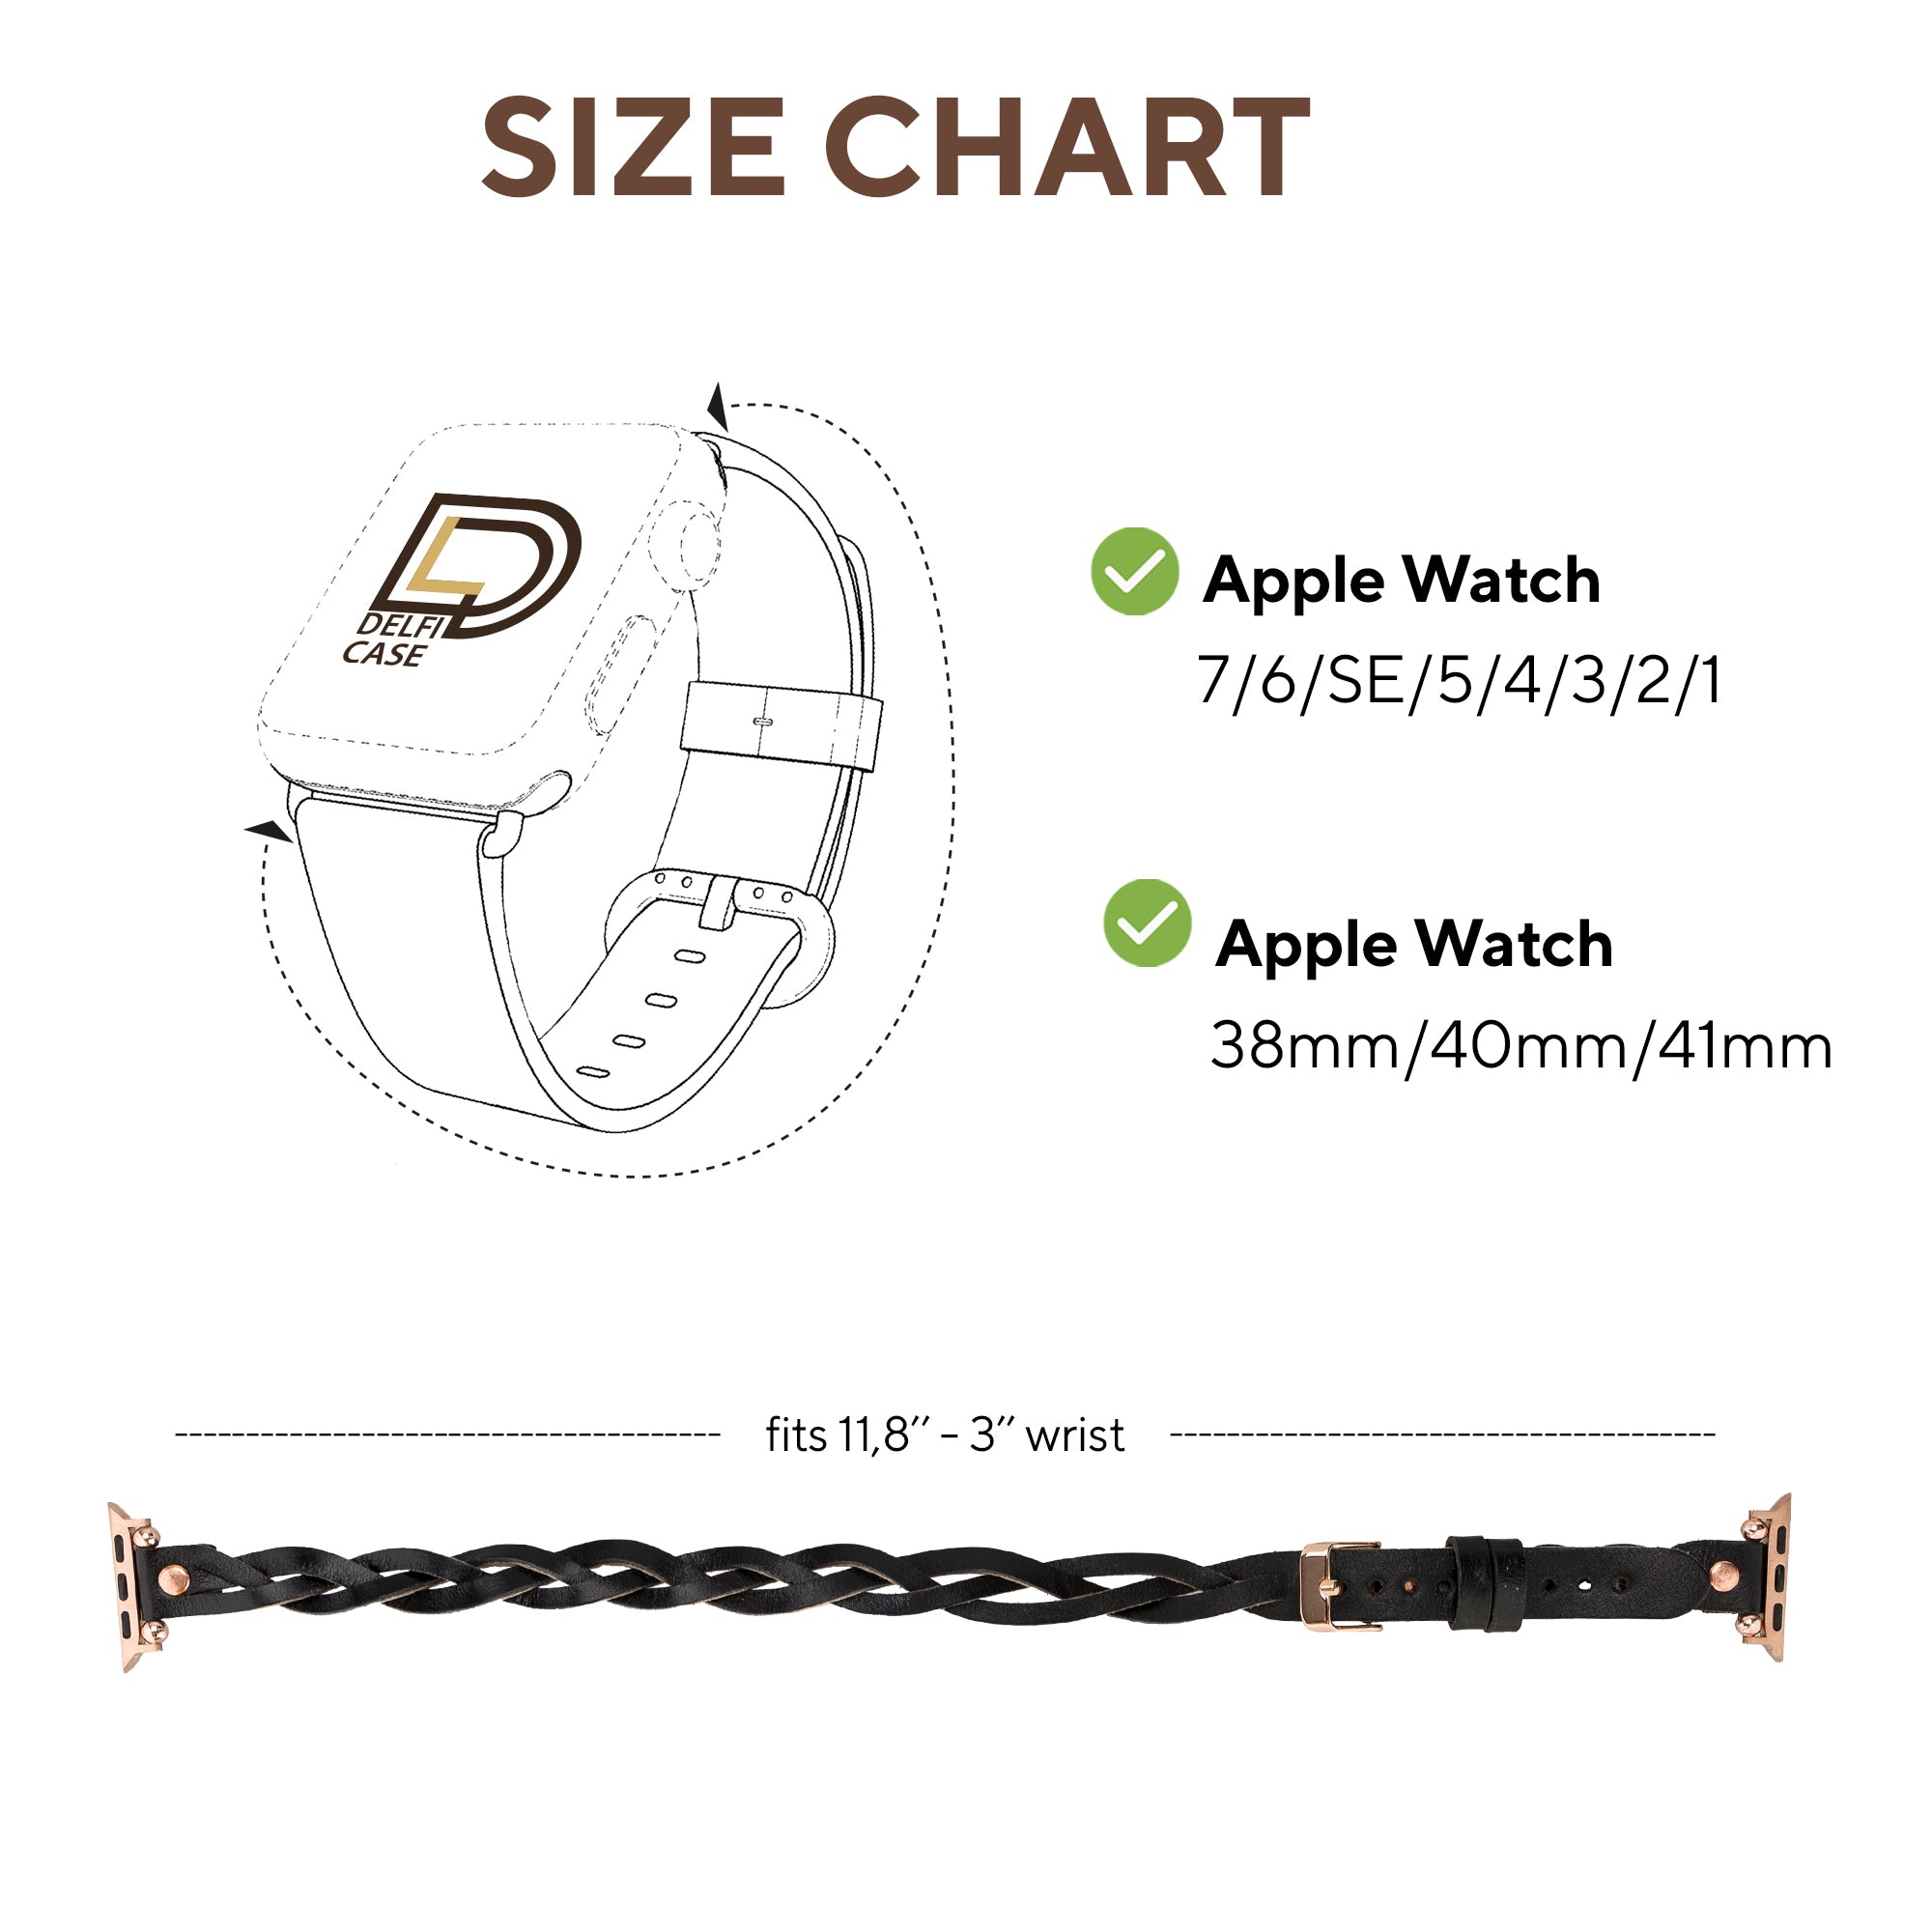 DelfiCase Sheffield Double Tour Watch Band for Apple Watch & Fitbit/Sense 94